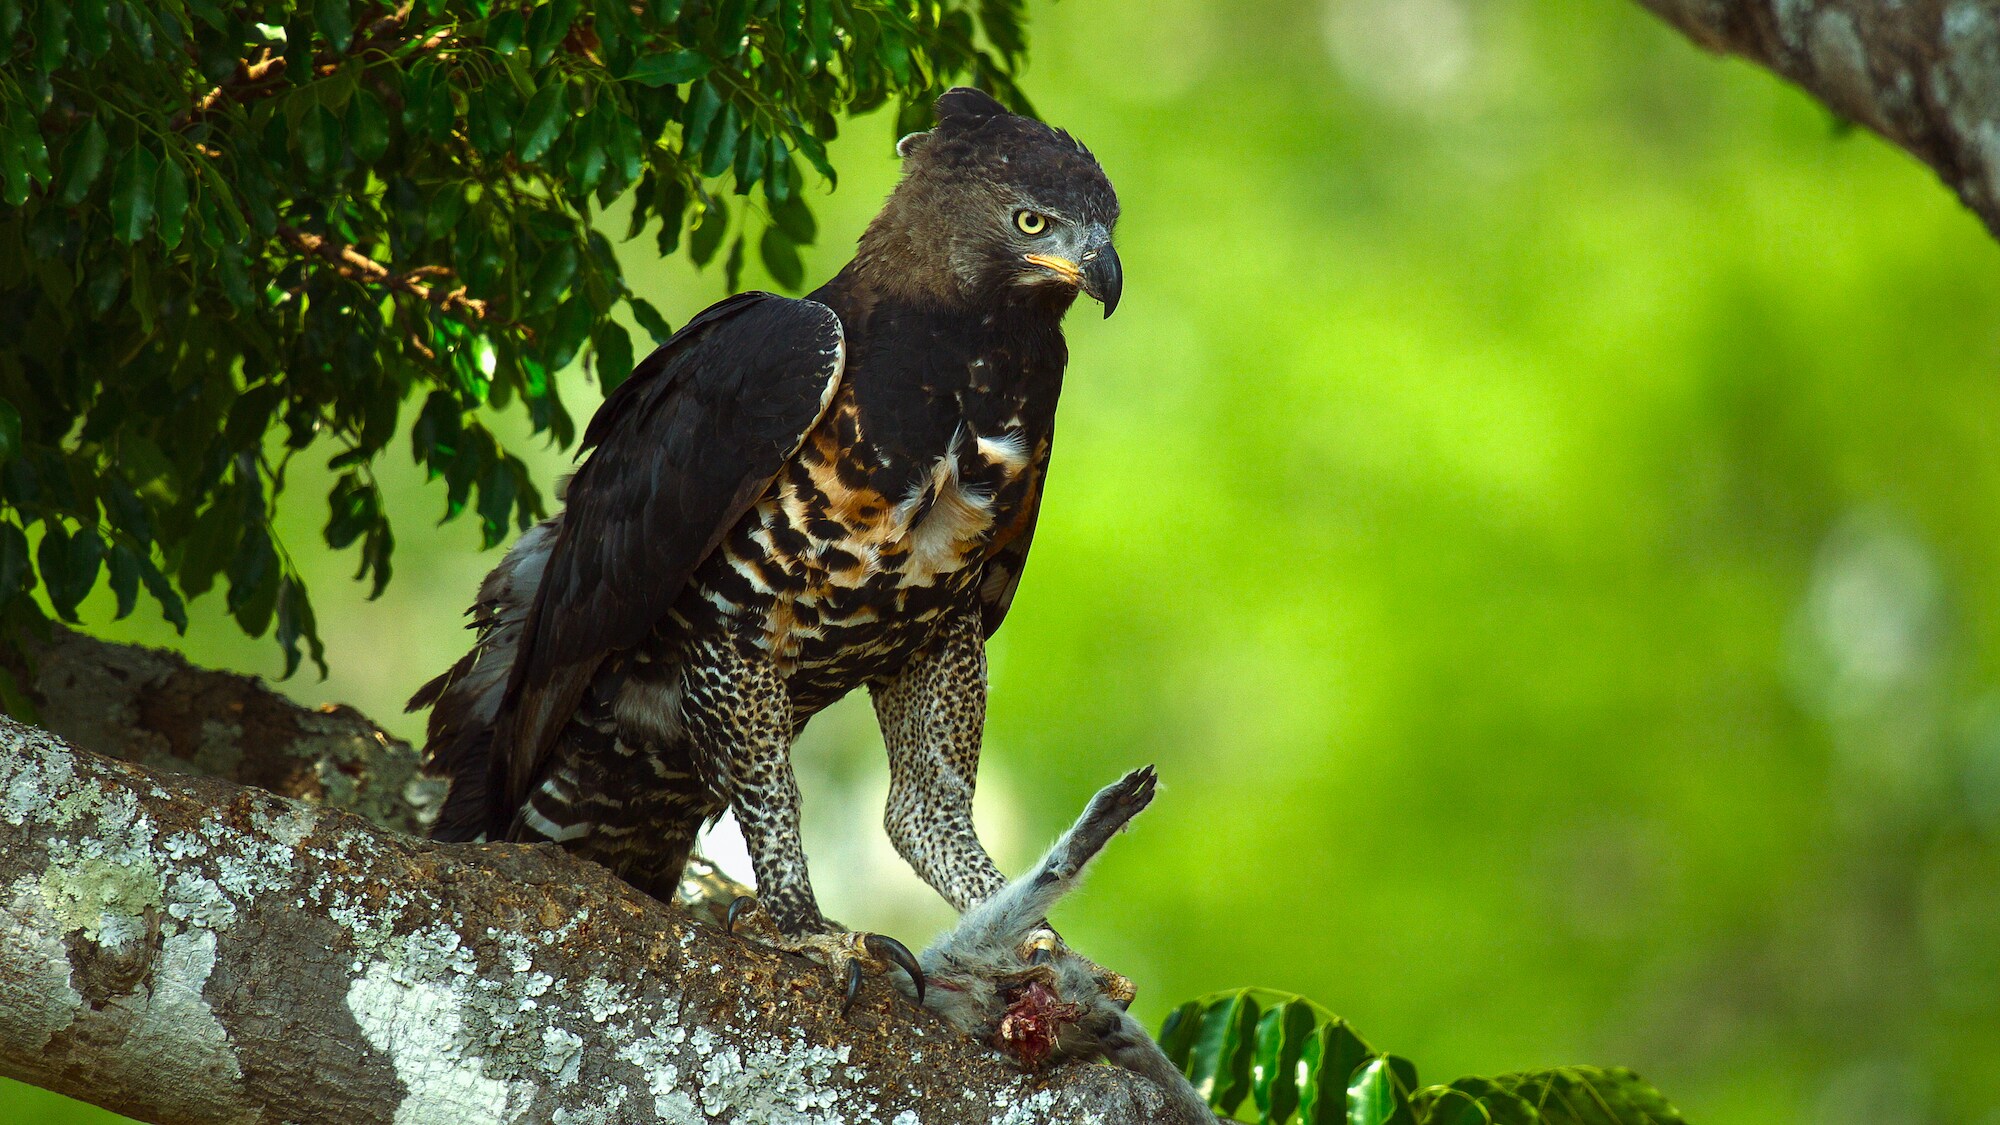 Crowned Eagle proudly defends it's meal. (Credit: National Geographic/Bertie Gregory for Disney+)